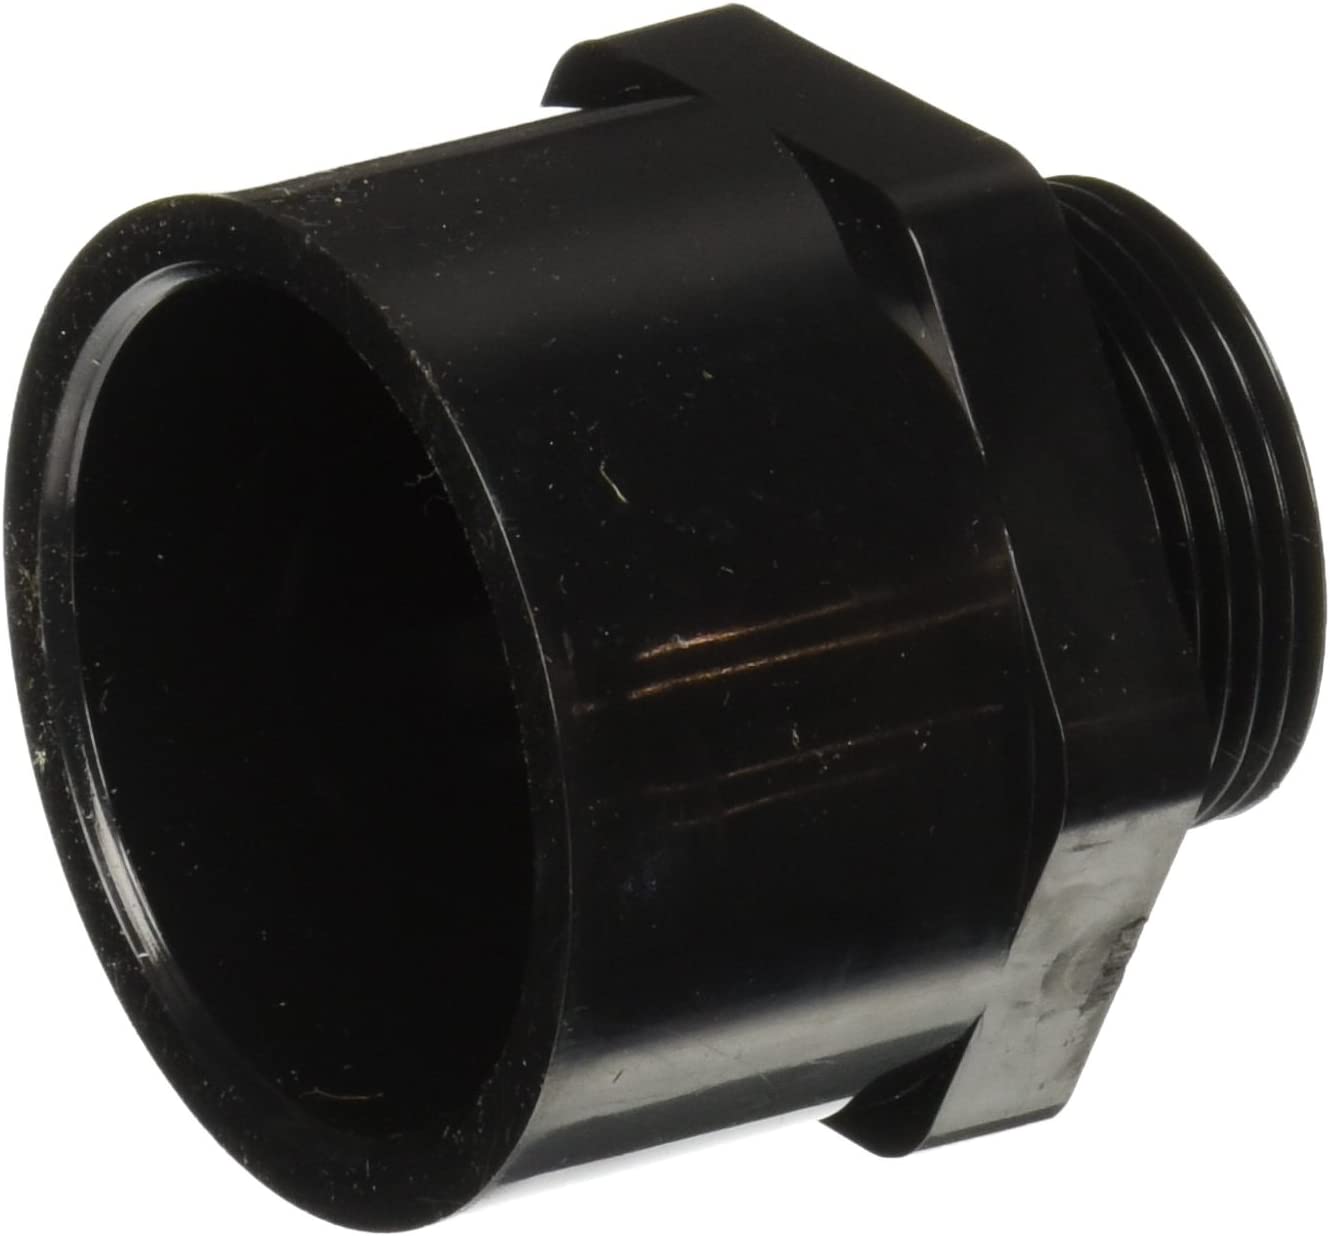 R0395500 Jandy Large Filter Tank Drain Adapter With O-ring Replacement Kit